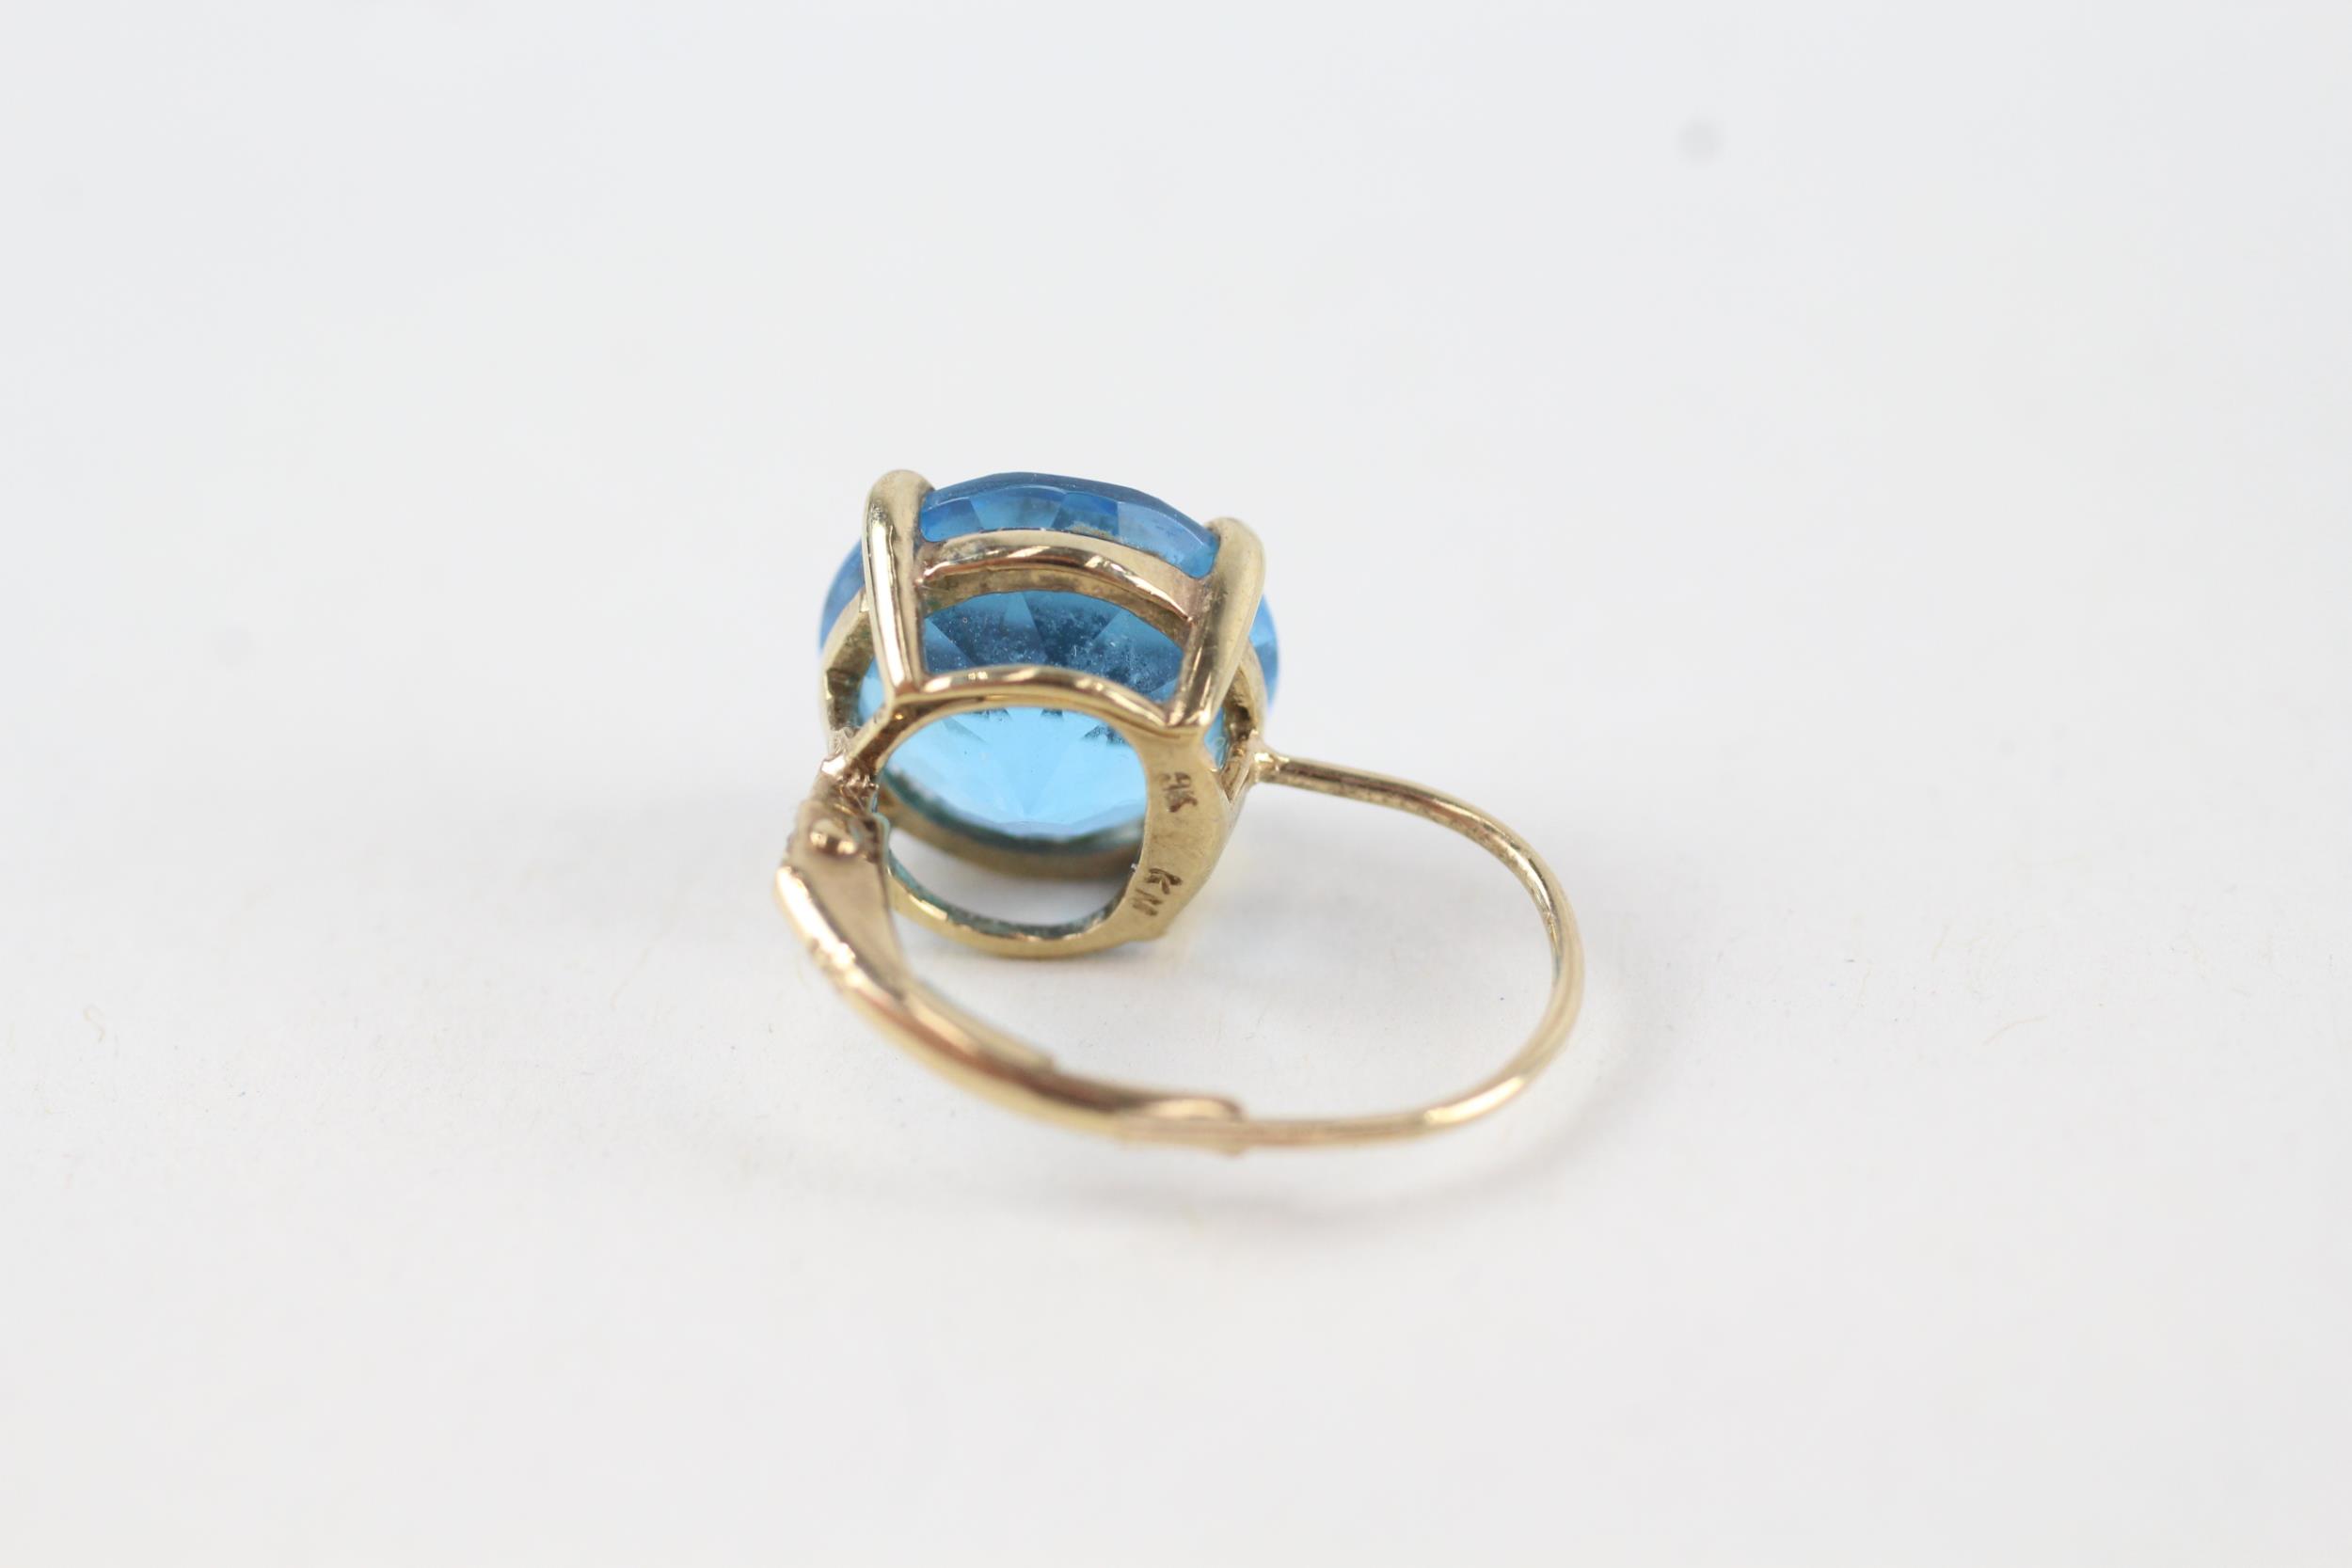 9ct gold blue topaz leverback earrings (3.7g) - Image 4 of 4